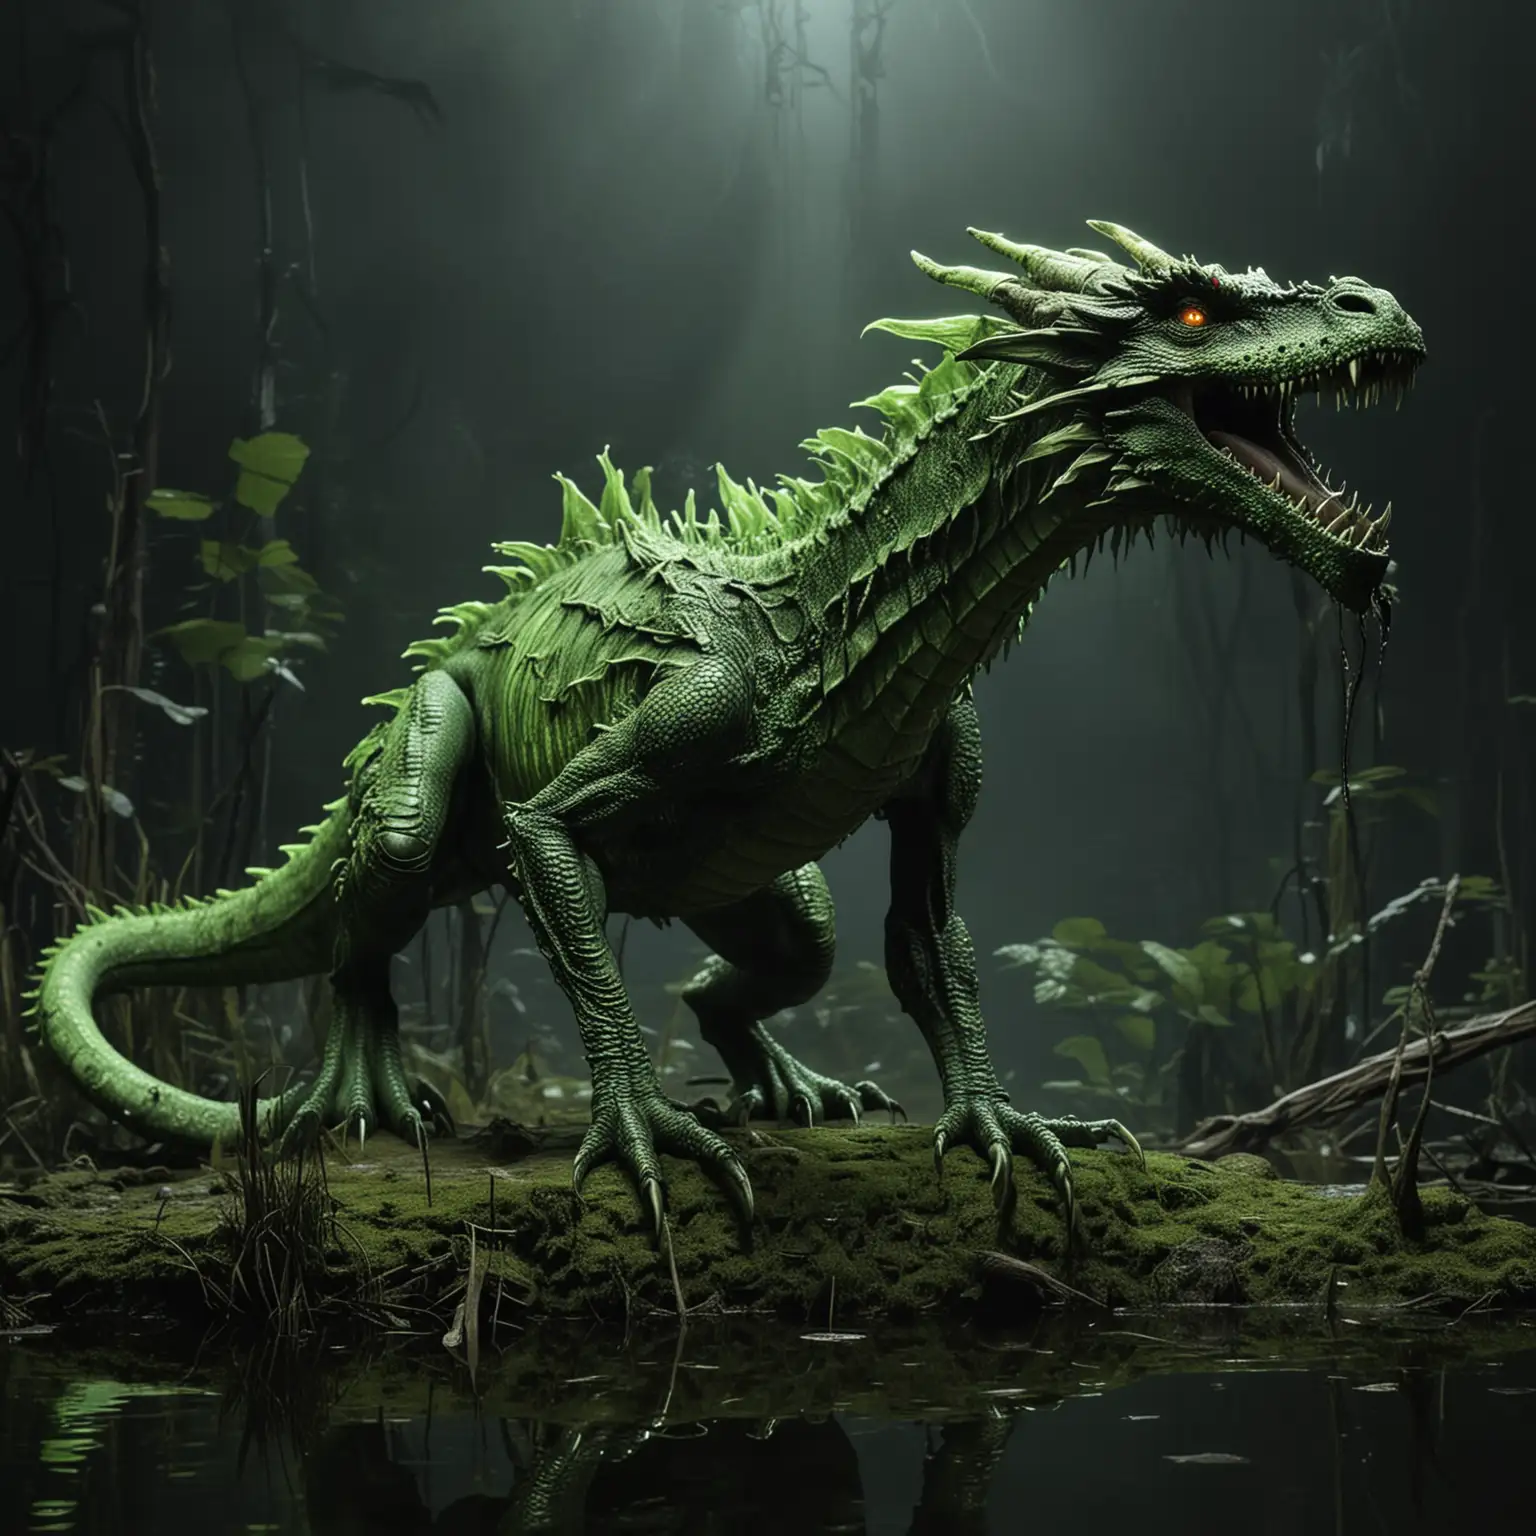 Realistic Swamp Dragon with Long Neck in Glowing Neon Green